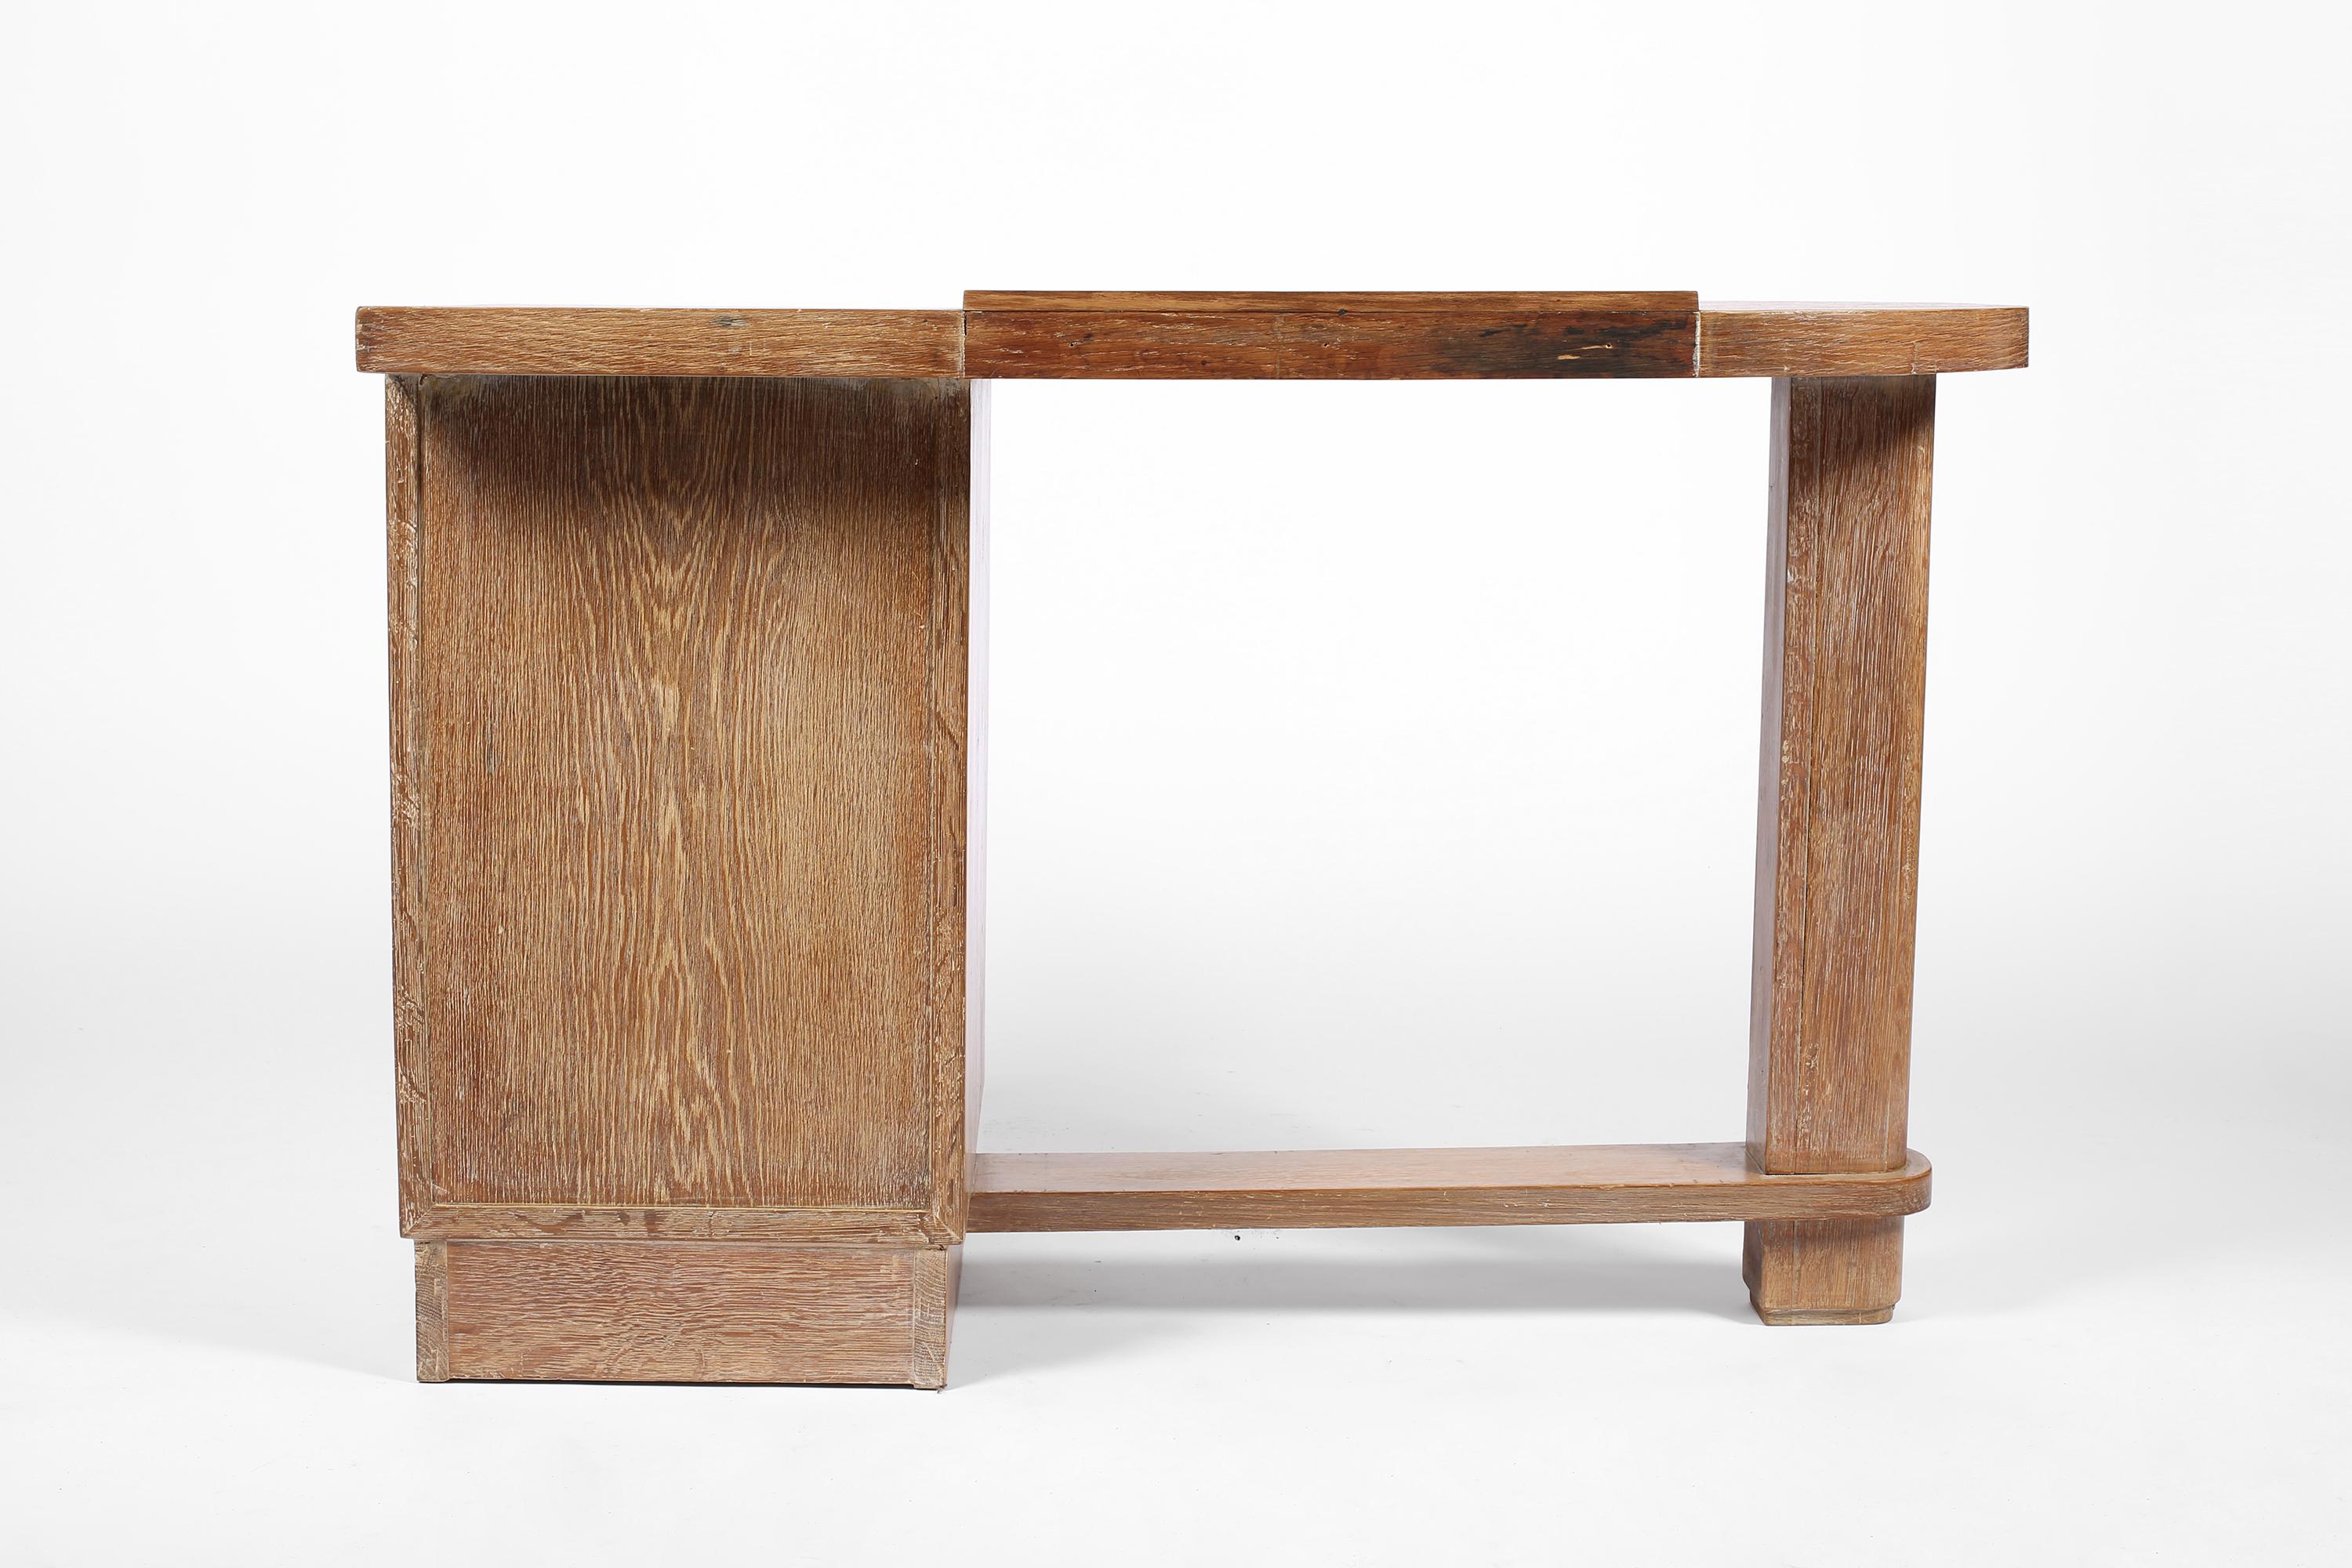 1930s French Art Deco Limed Oak and Leather Desk in the manner of Jacques Adnet For Sale 12